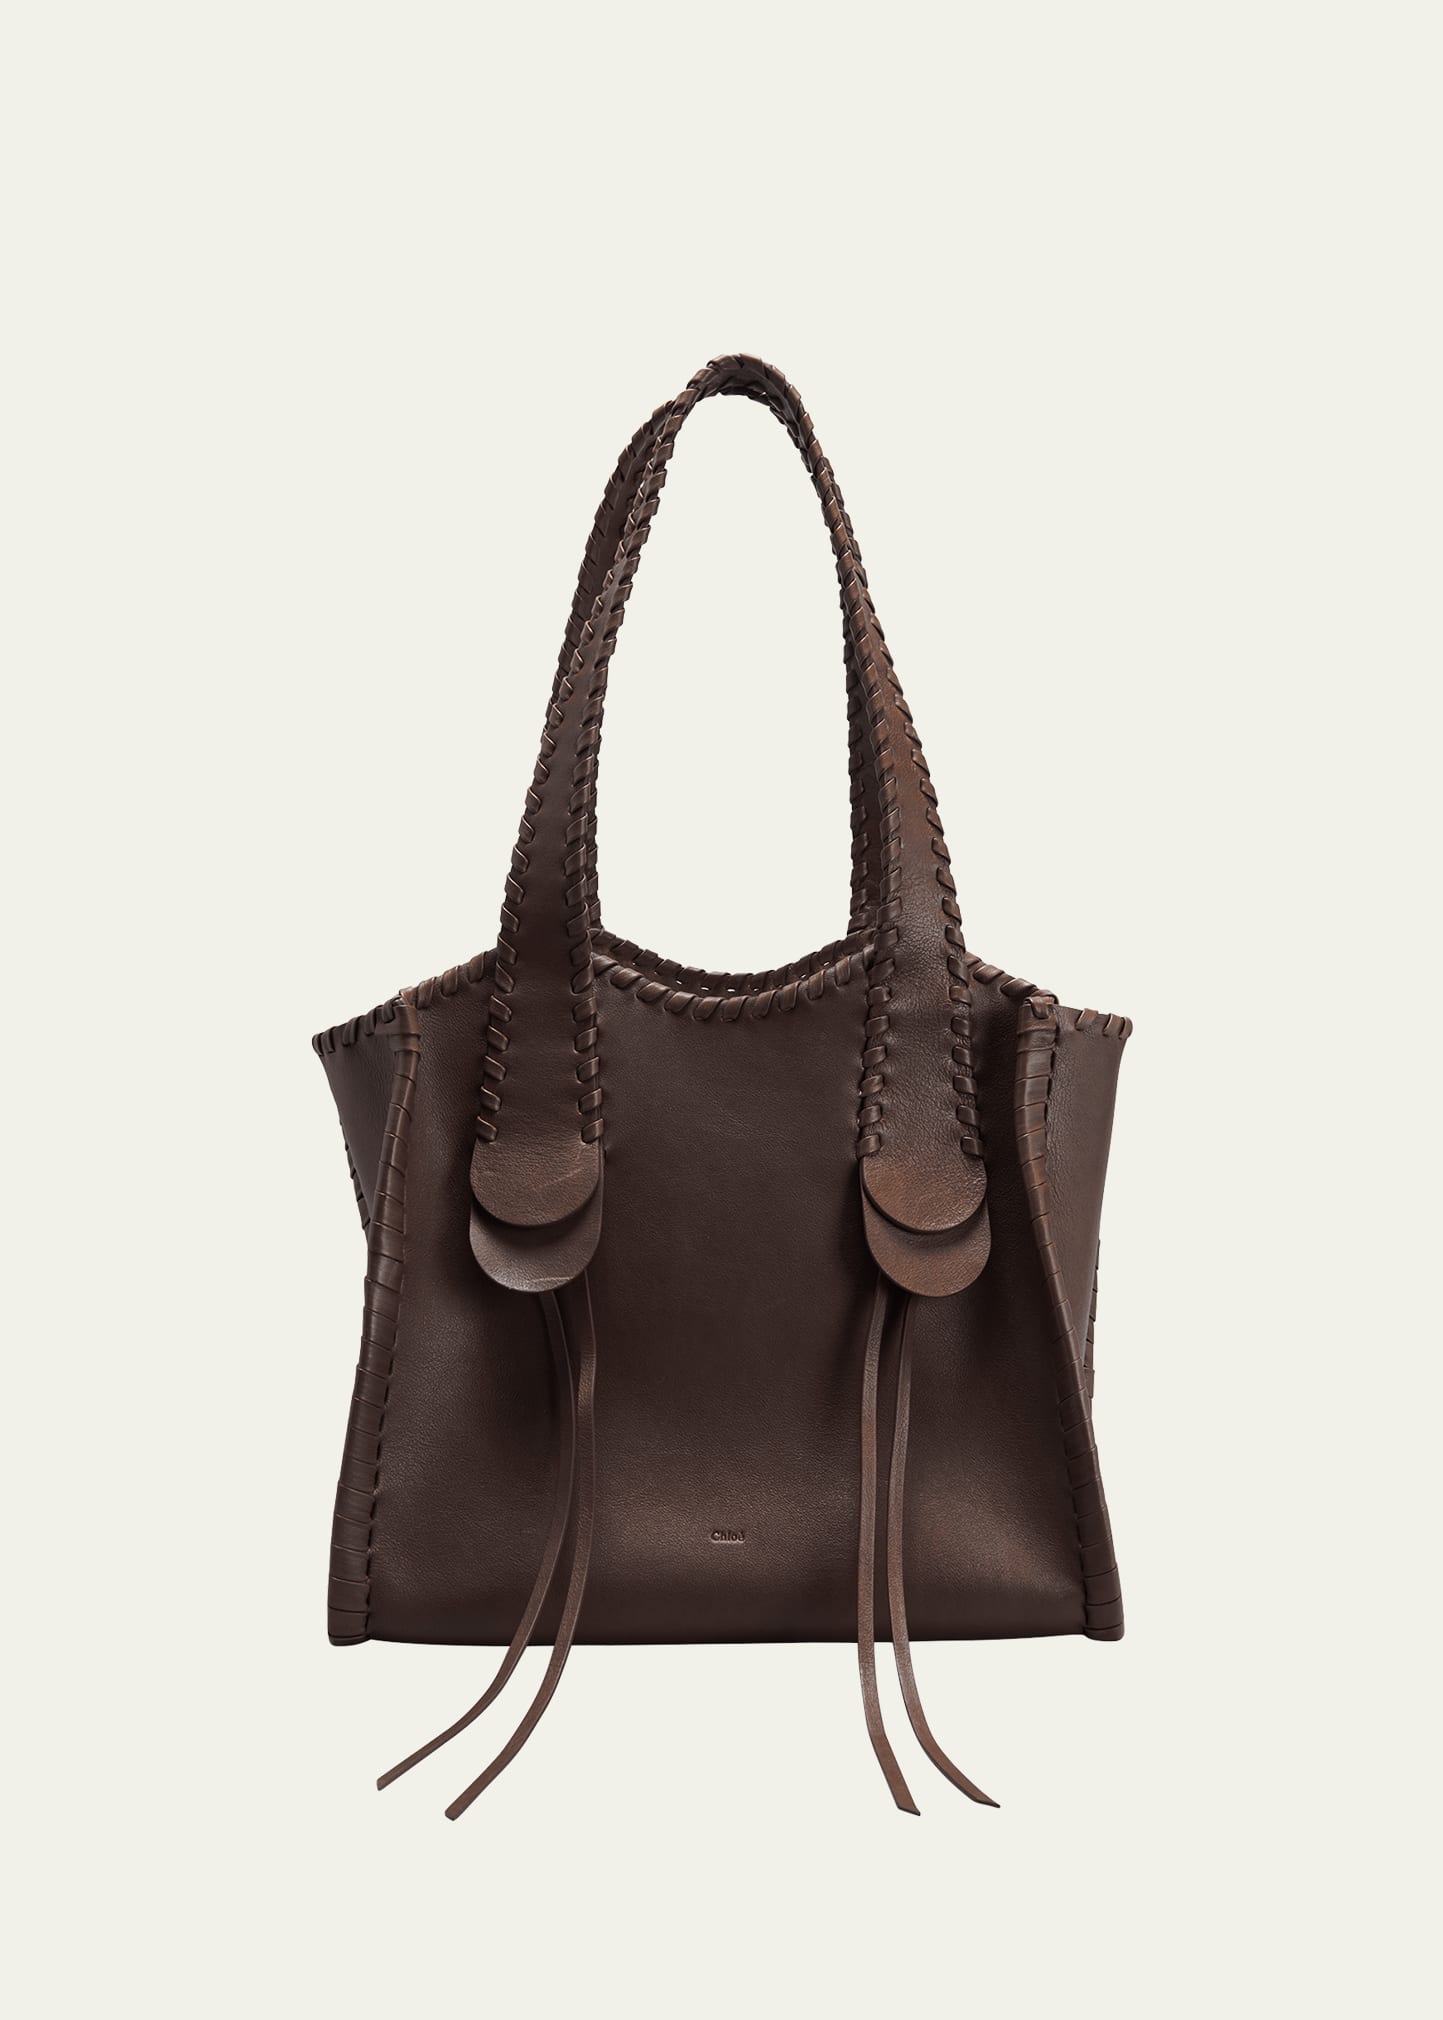 Chloé Mony Medium Whipstitch Tote Bag In Brown